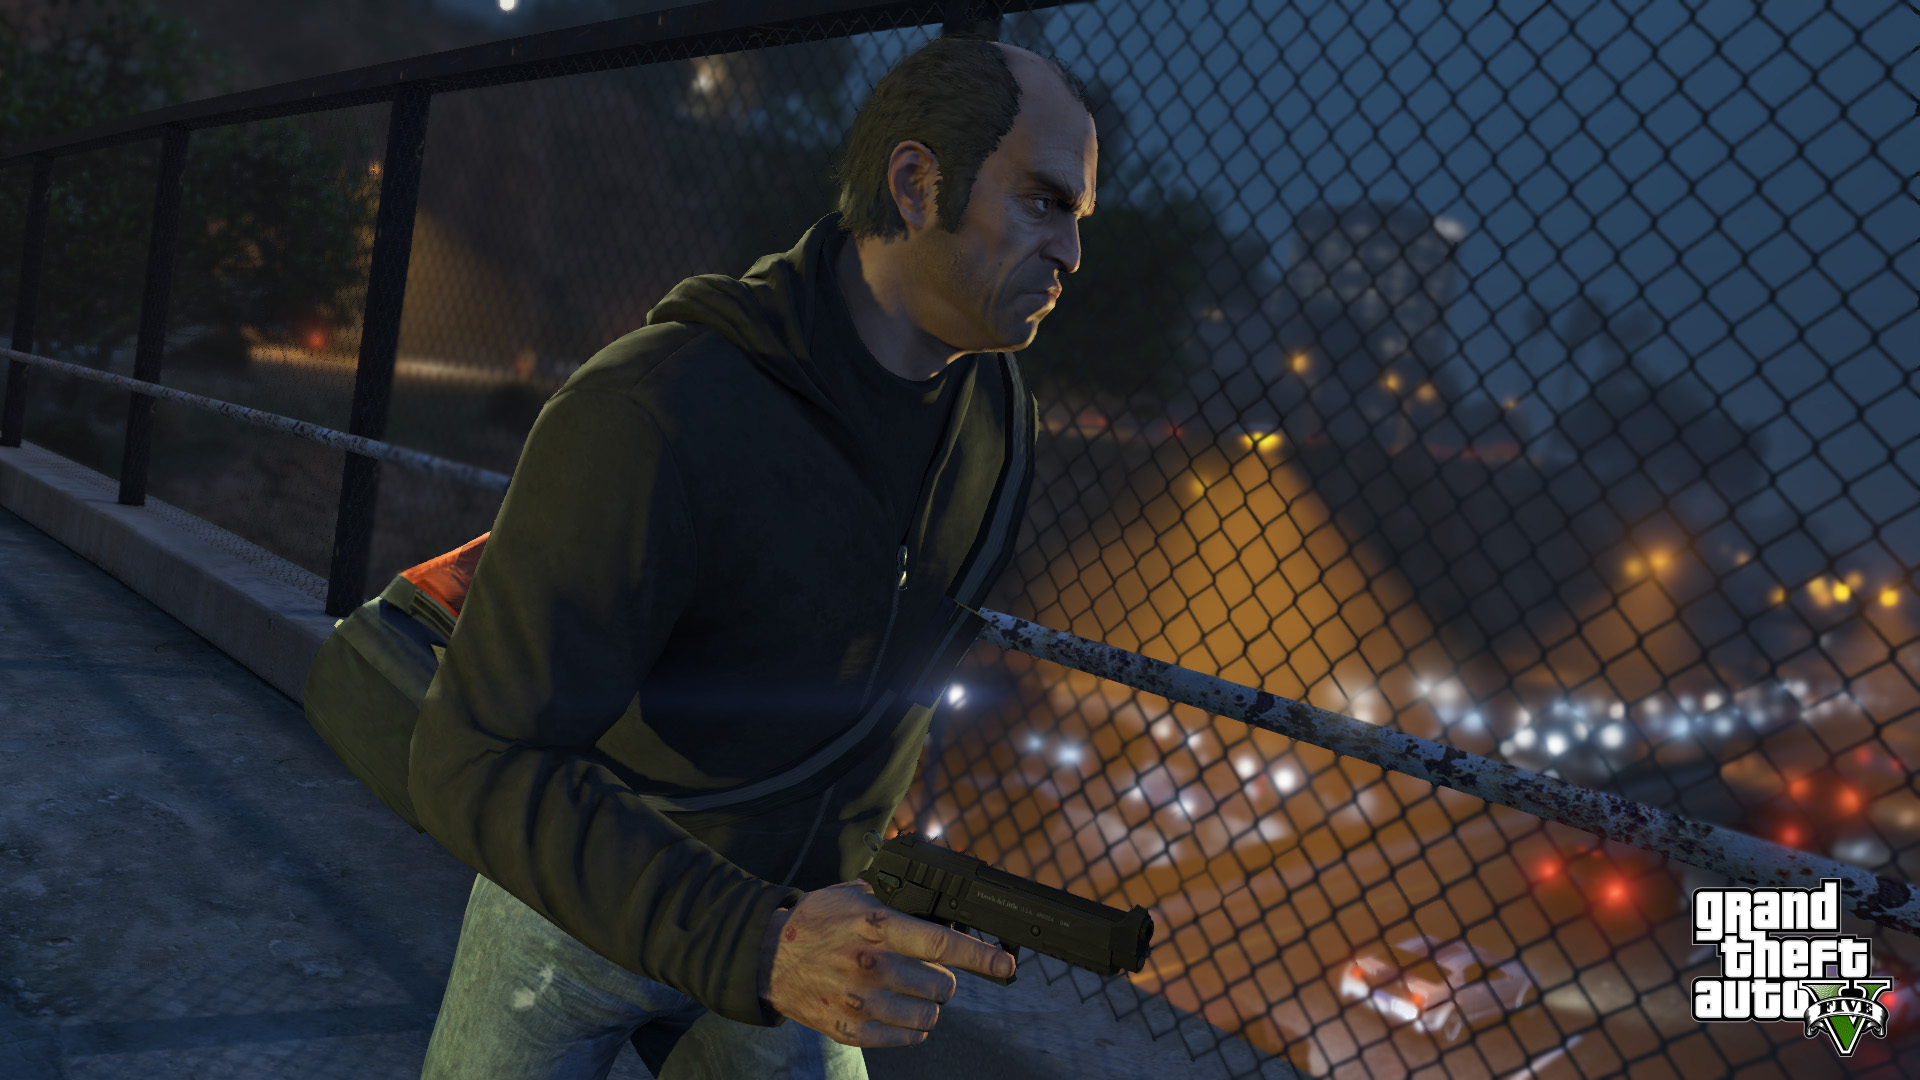 Grand Theft Auto V Release Dates and Exclusive Content Details for ...